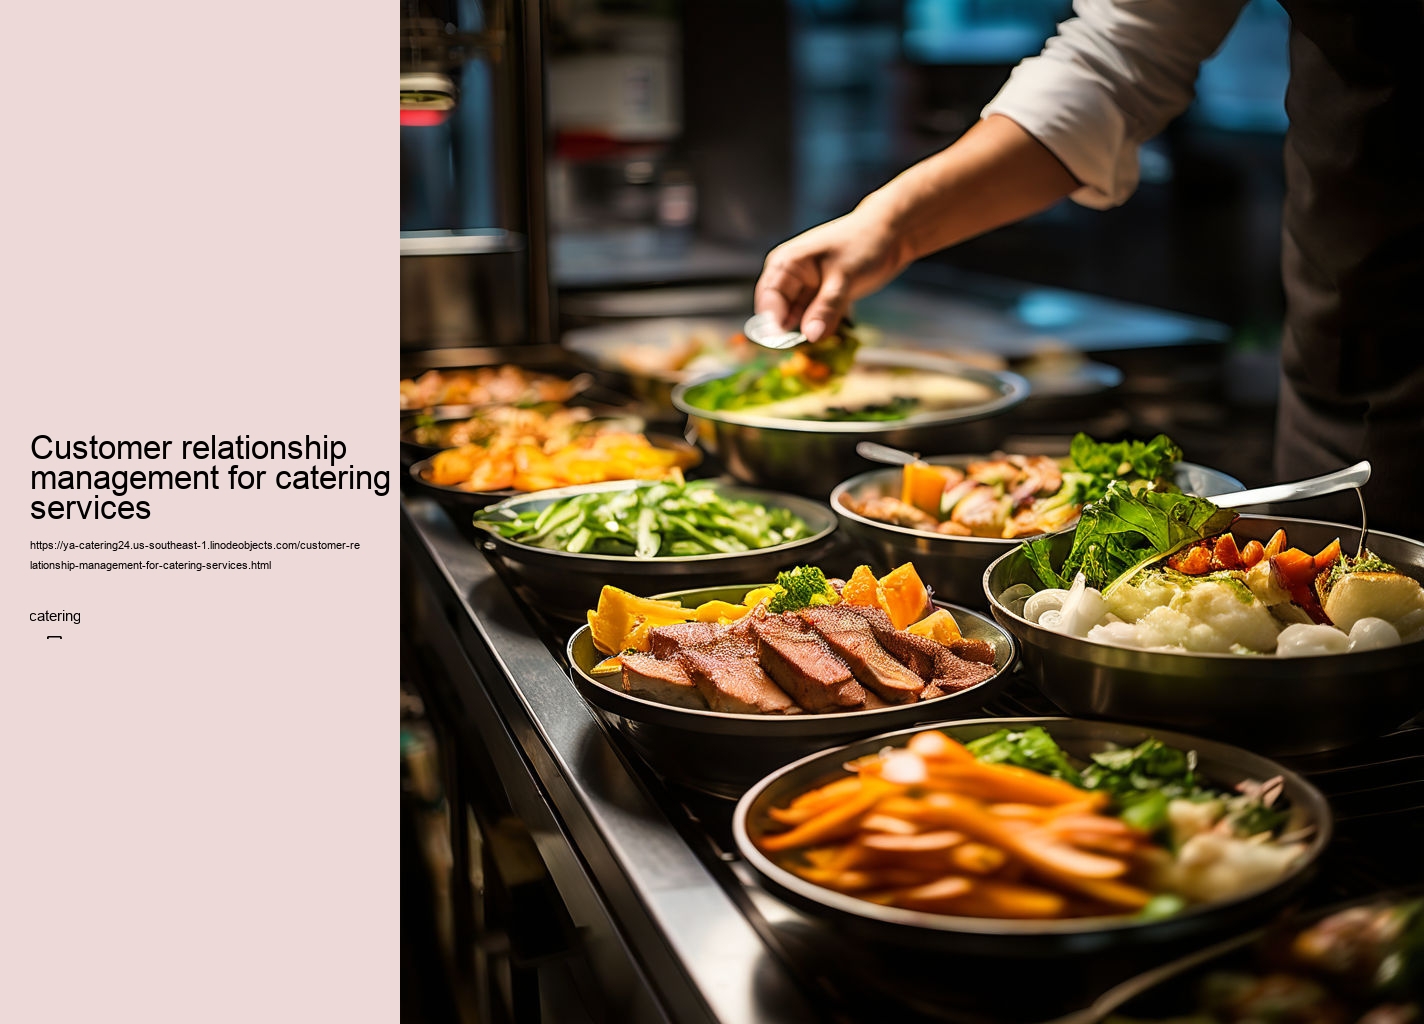 Customer relationship management for catering services